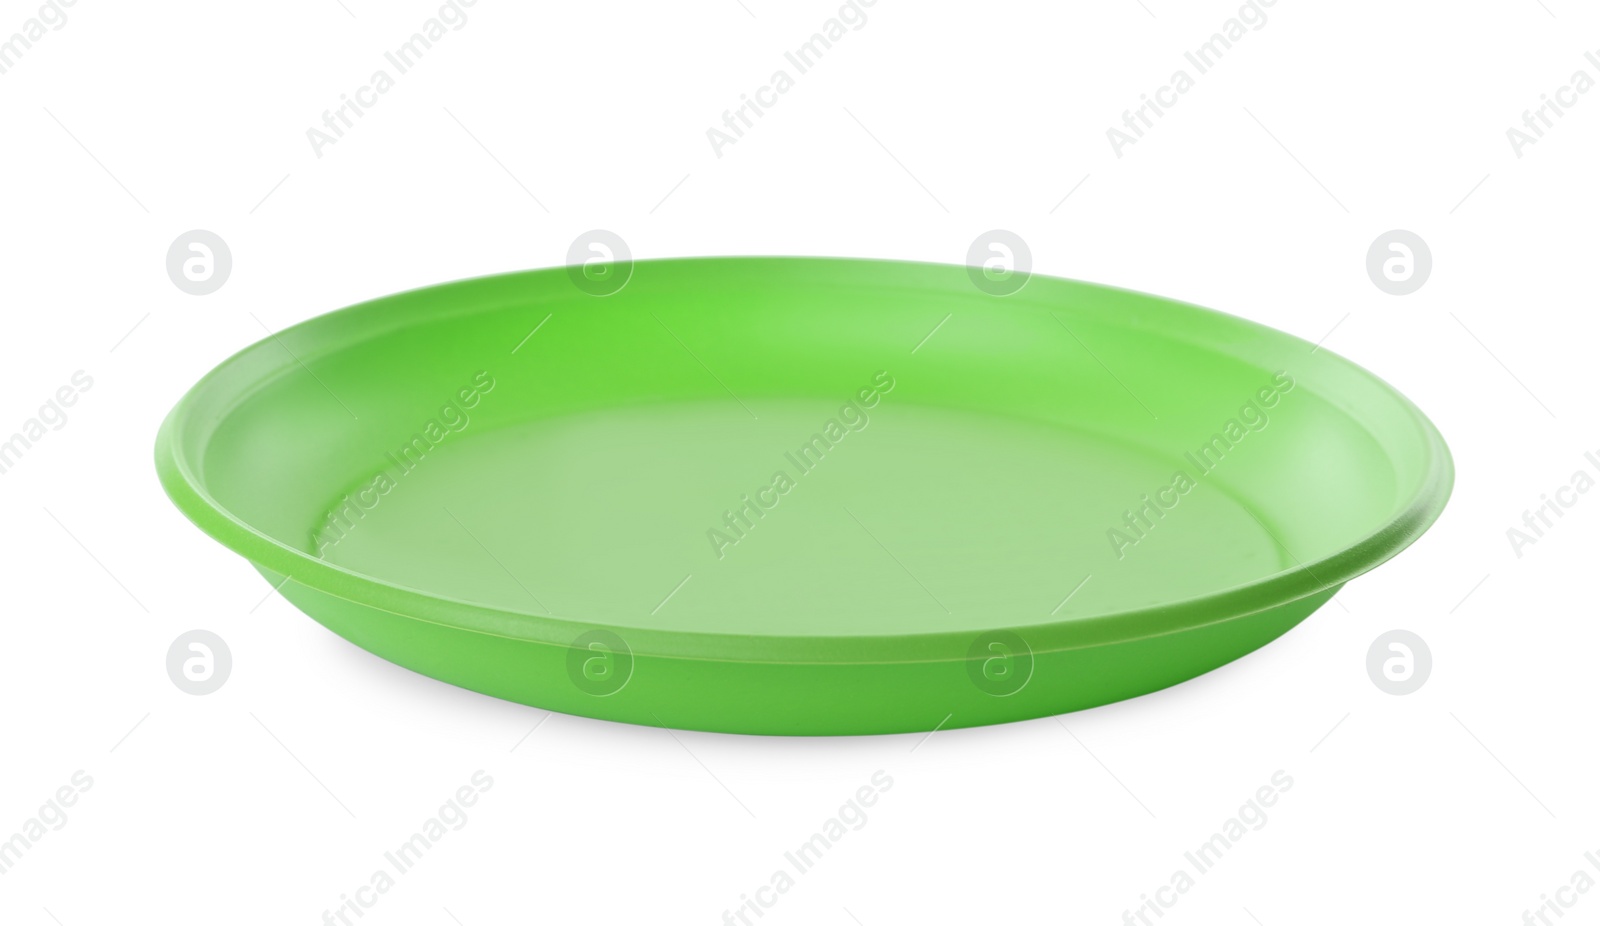 Photo of Disposable green plastic plate isolated on white